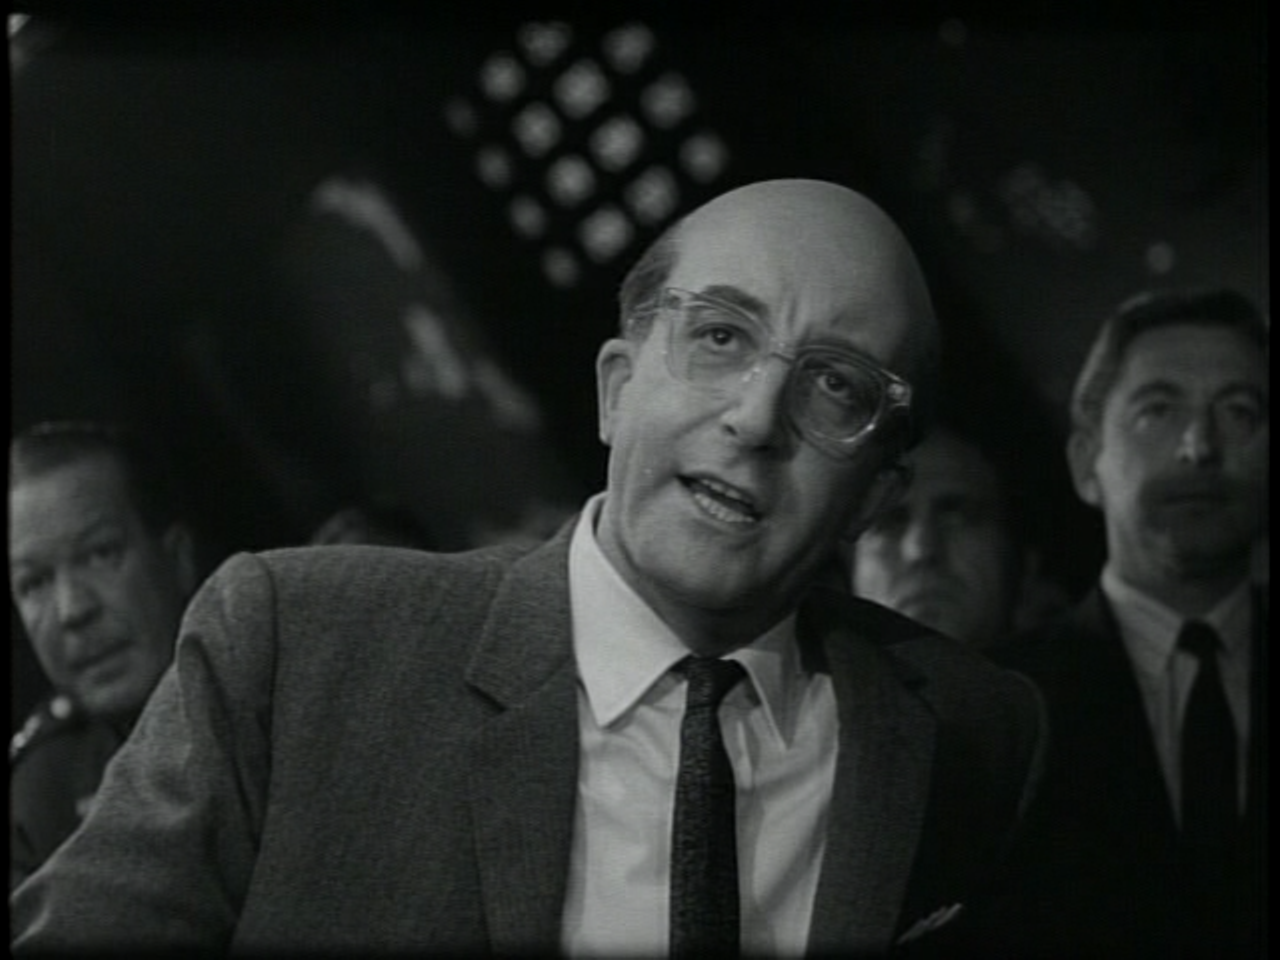 Peter Sellers as President Merkin Muffley in Dr. Strangelove or: How I Learned to Stop Worrying and Love the Bomb (1964)
One of Sellers' multiple roles in the film was as President Muffley. As the prez, Sellers proclaims, "Gentlemen, you can't fight in here! This is the War Room."